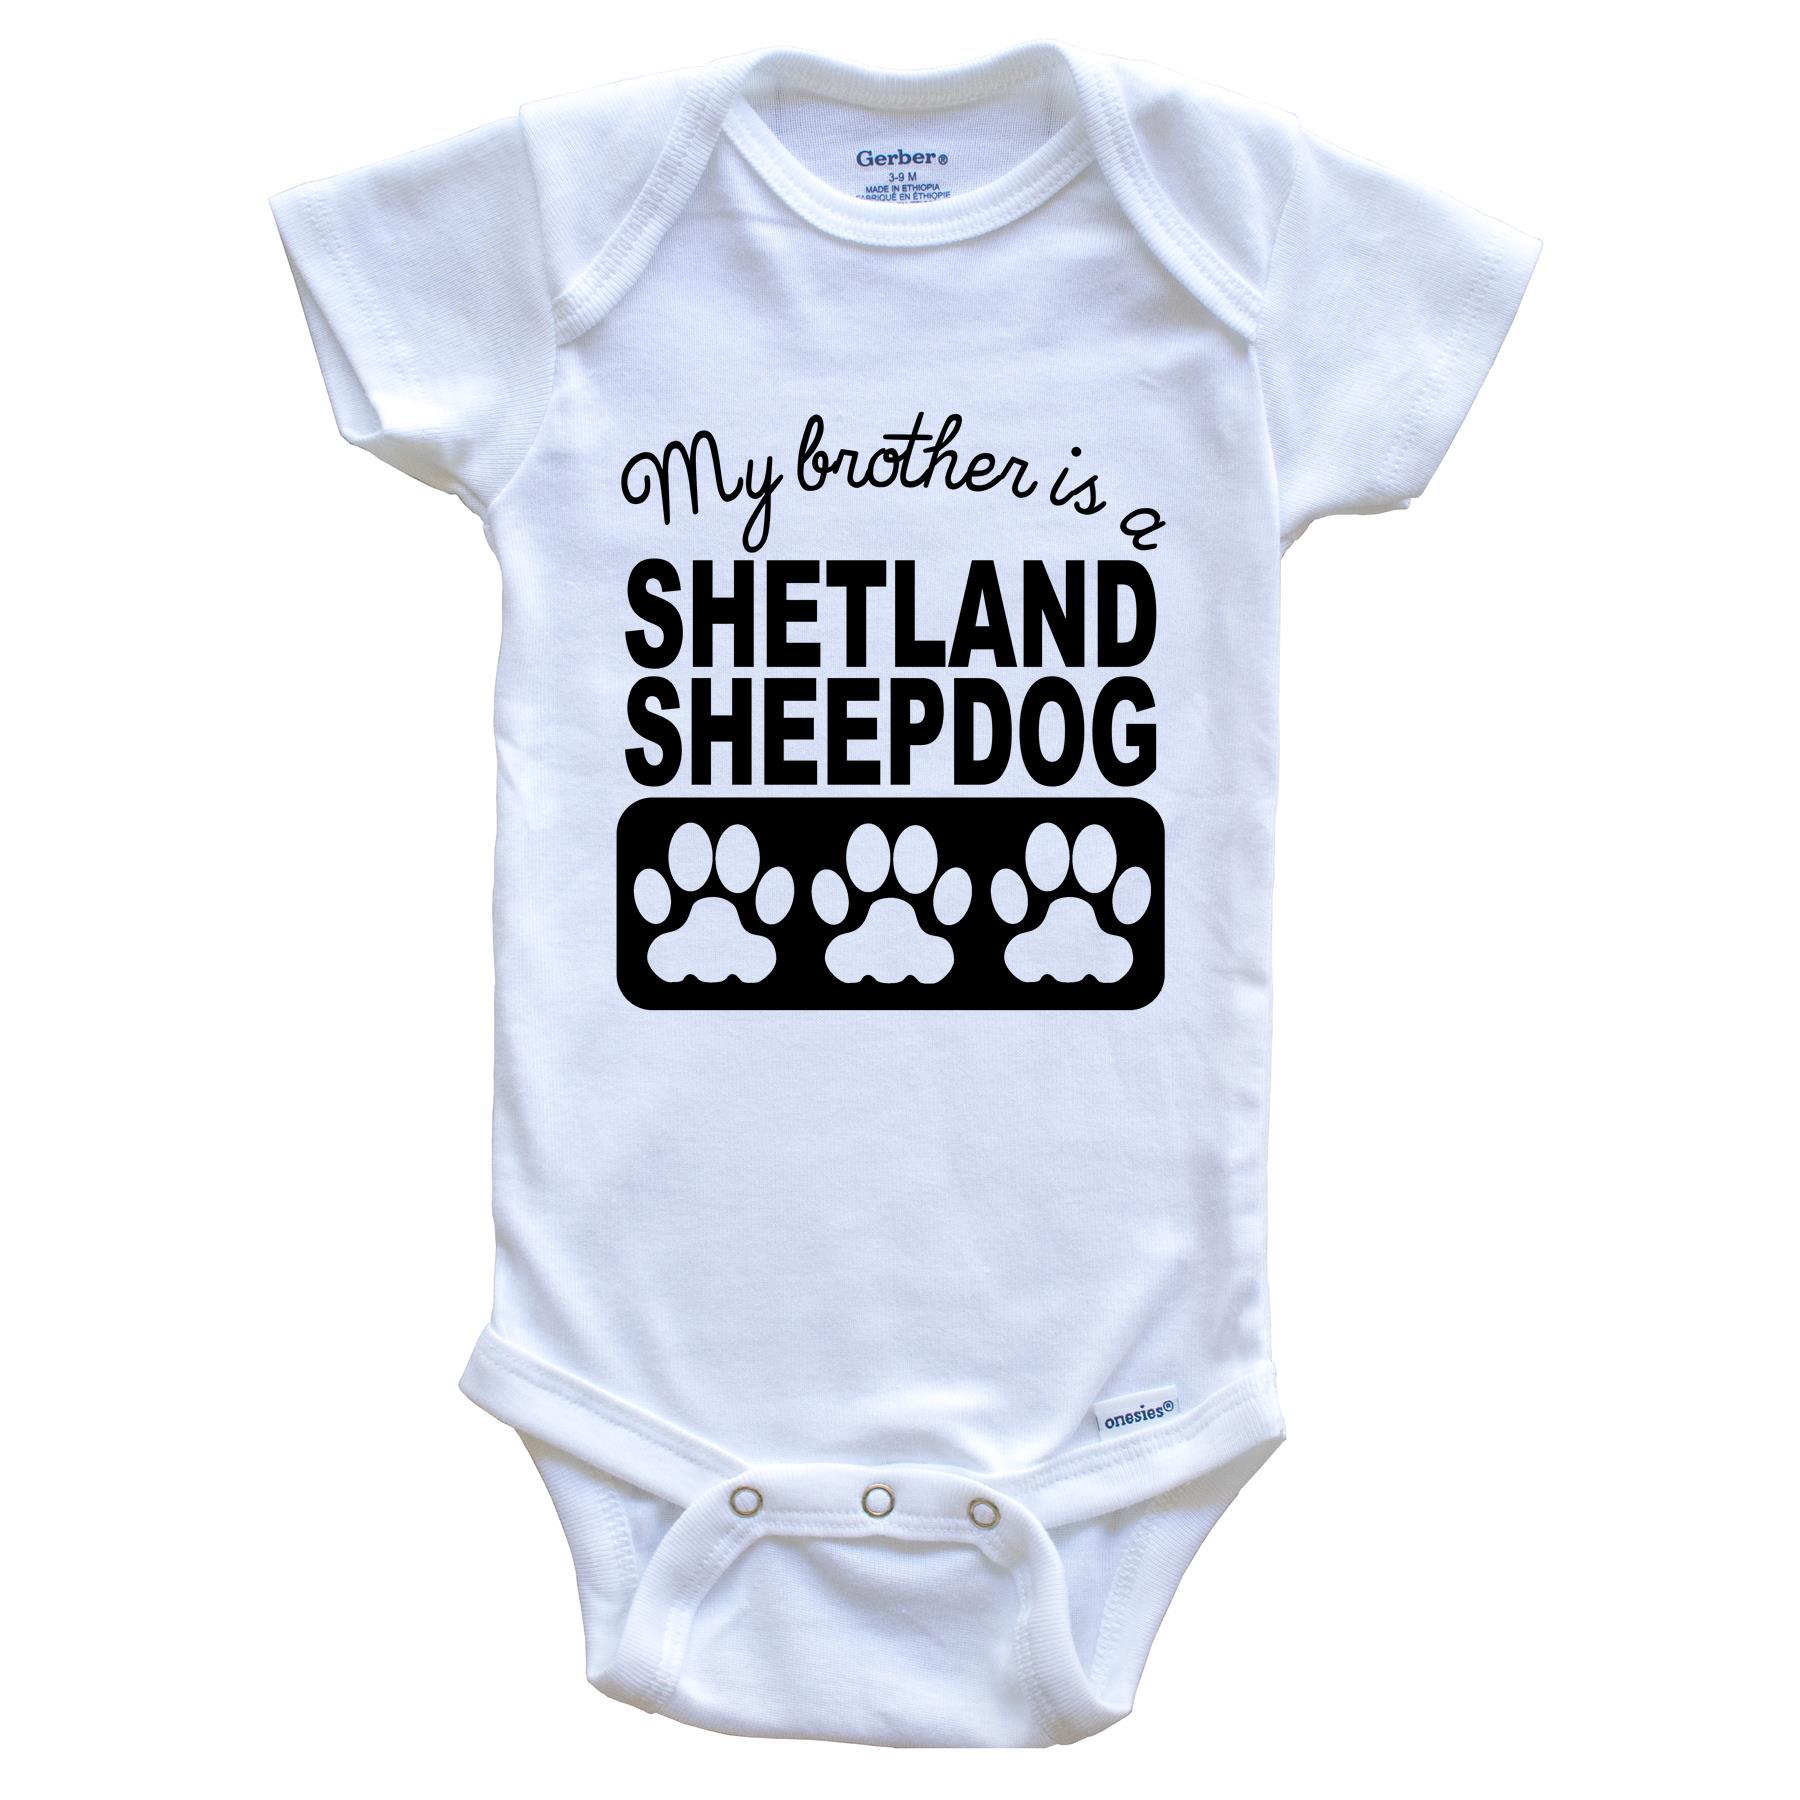 My Brother Is A Shetland Sheepdog Baby Onesie